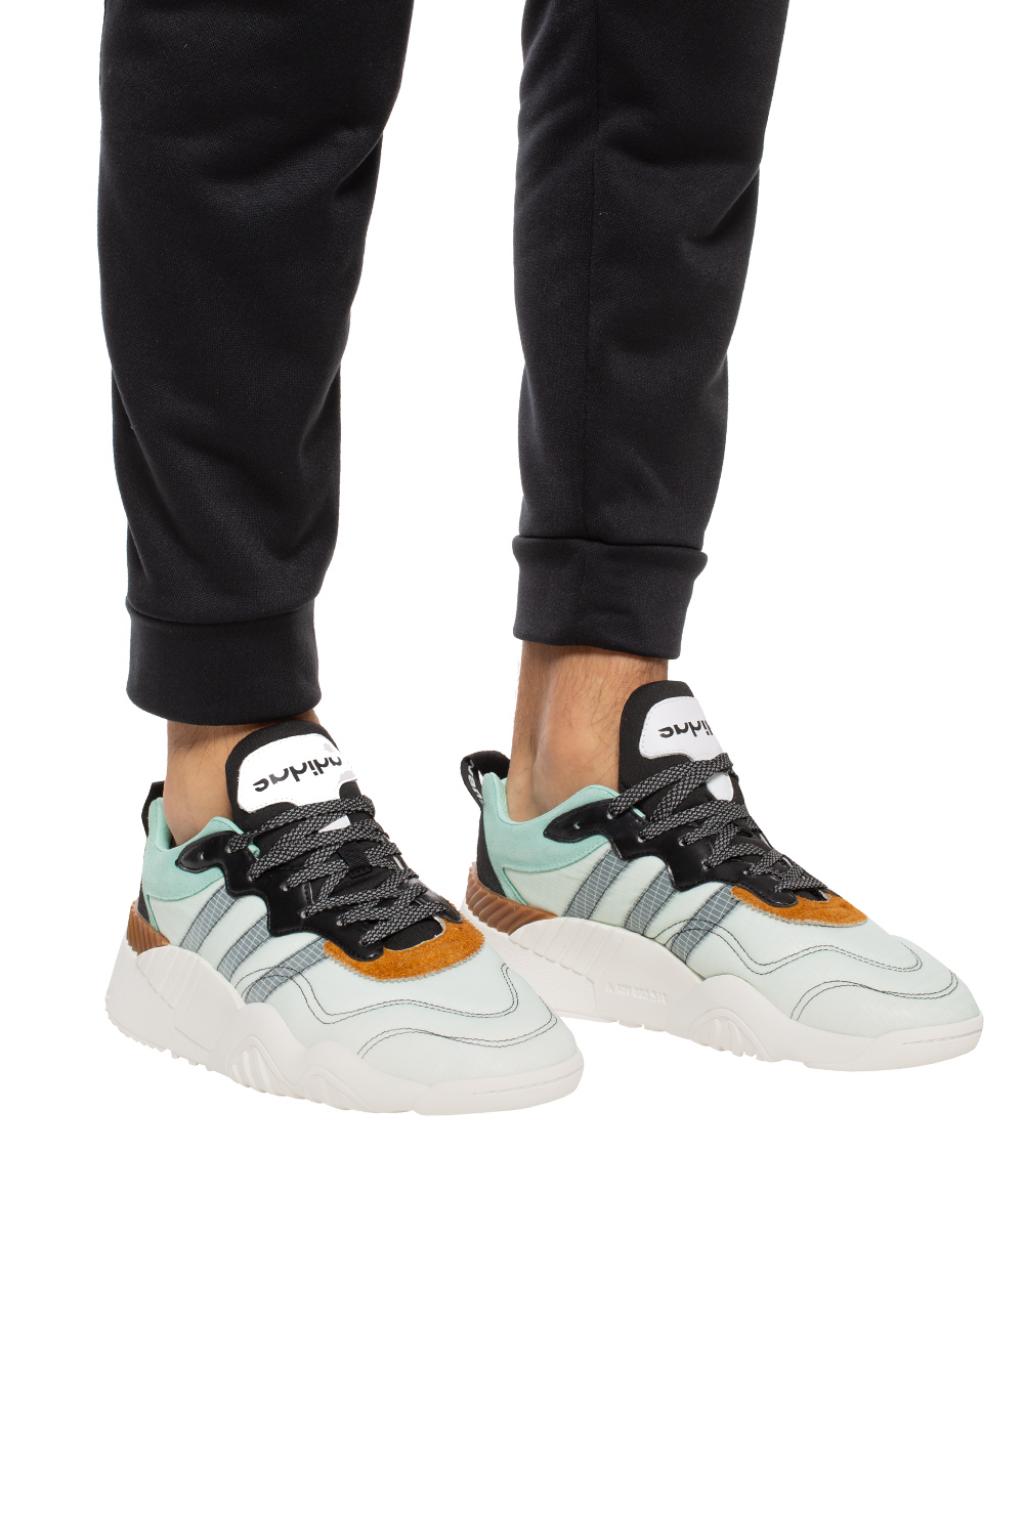 adidas aw turnout trainer alexander wang clear mint core black